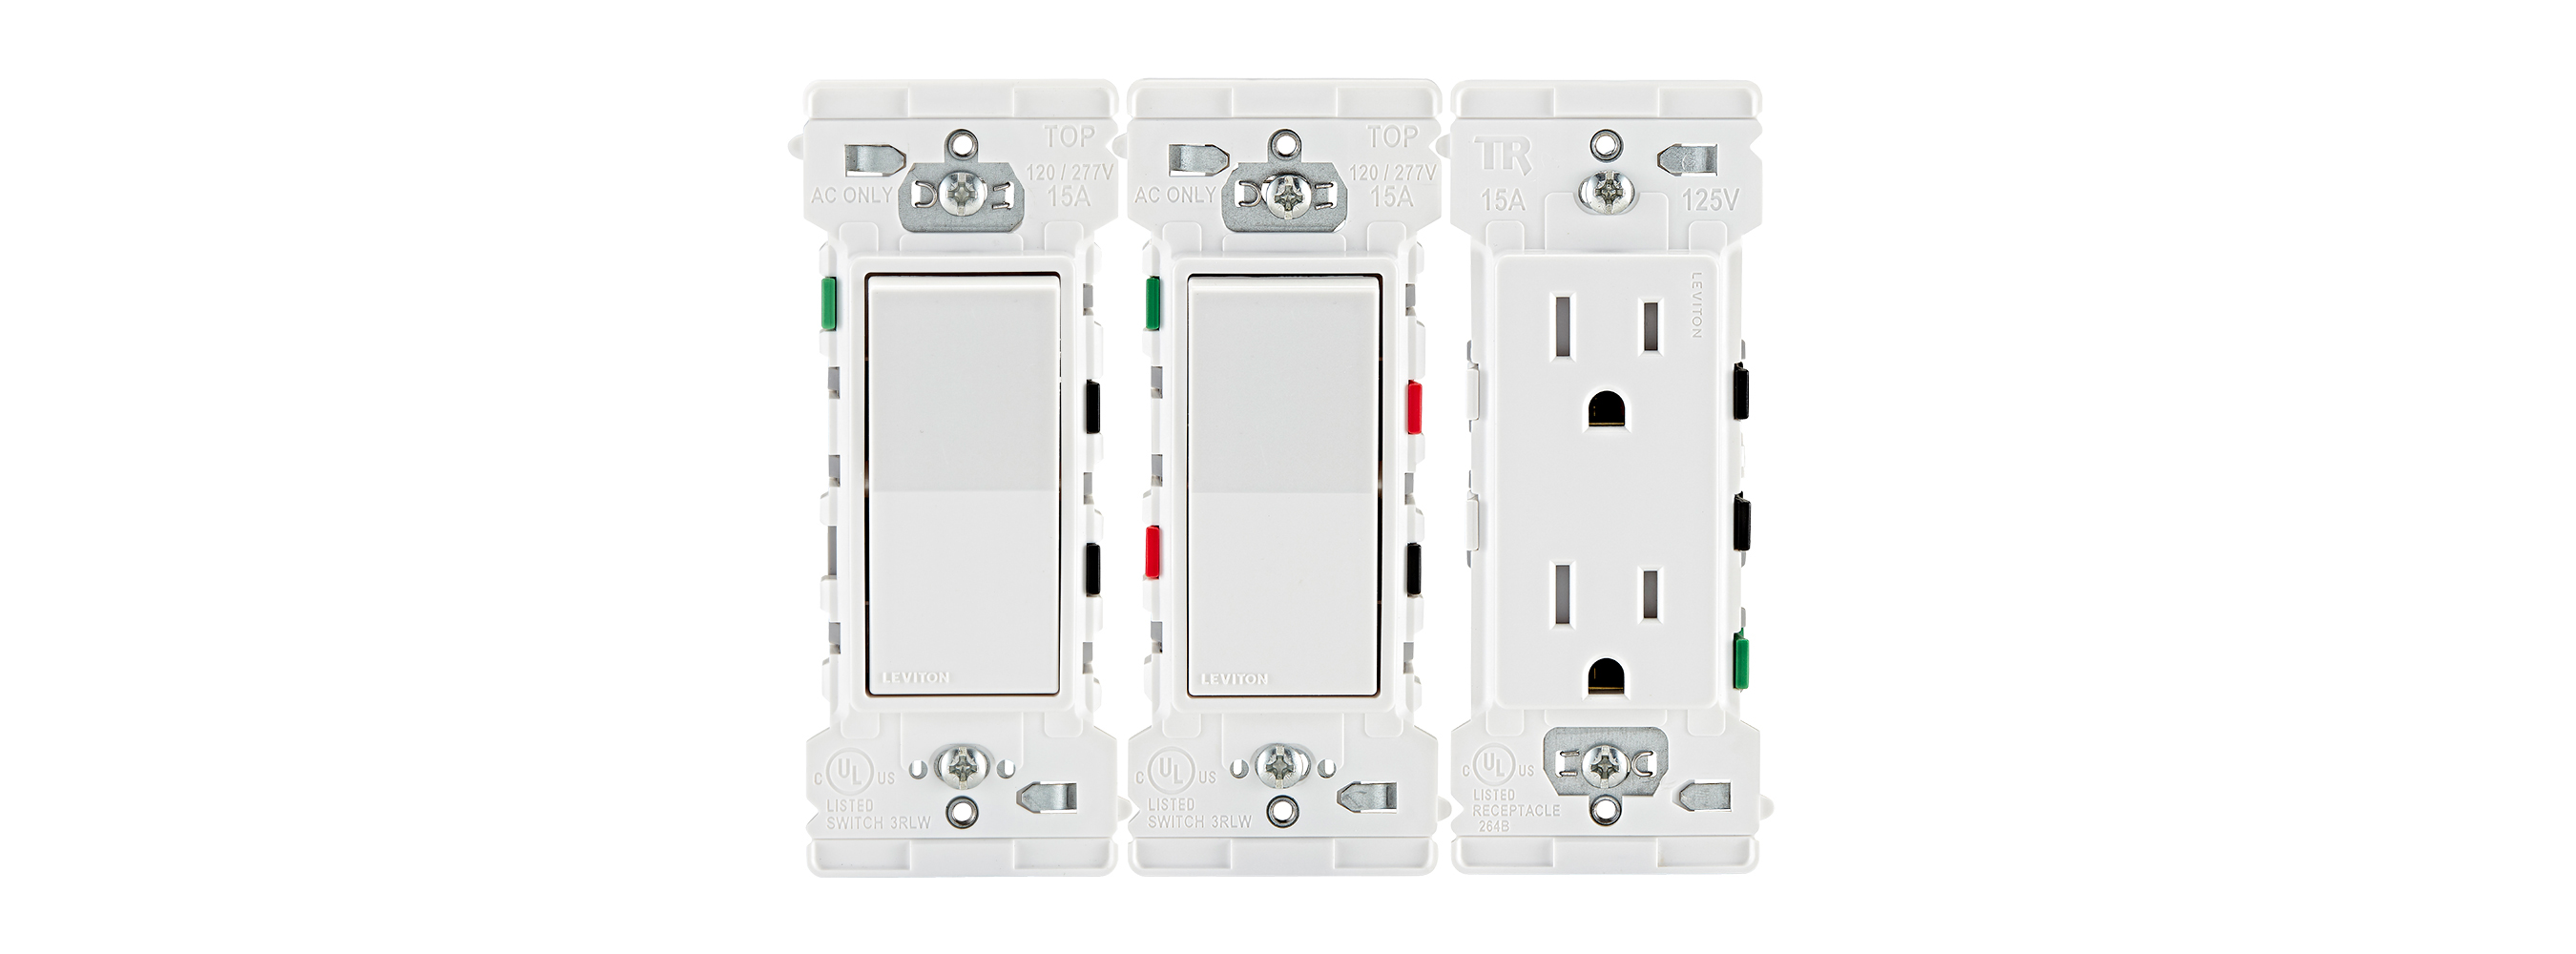 The Decora Edge line of wiring devices are a faster, easier and safer way to install electrical devices for the home.